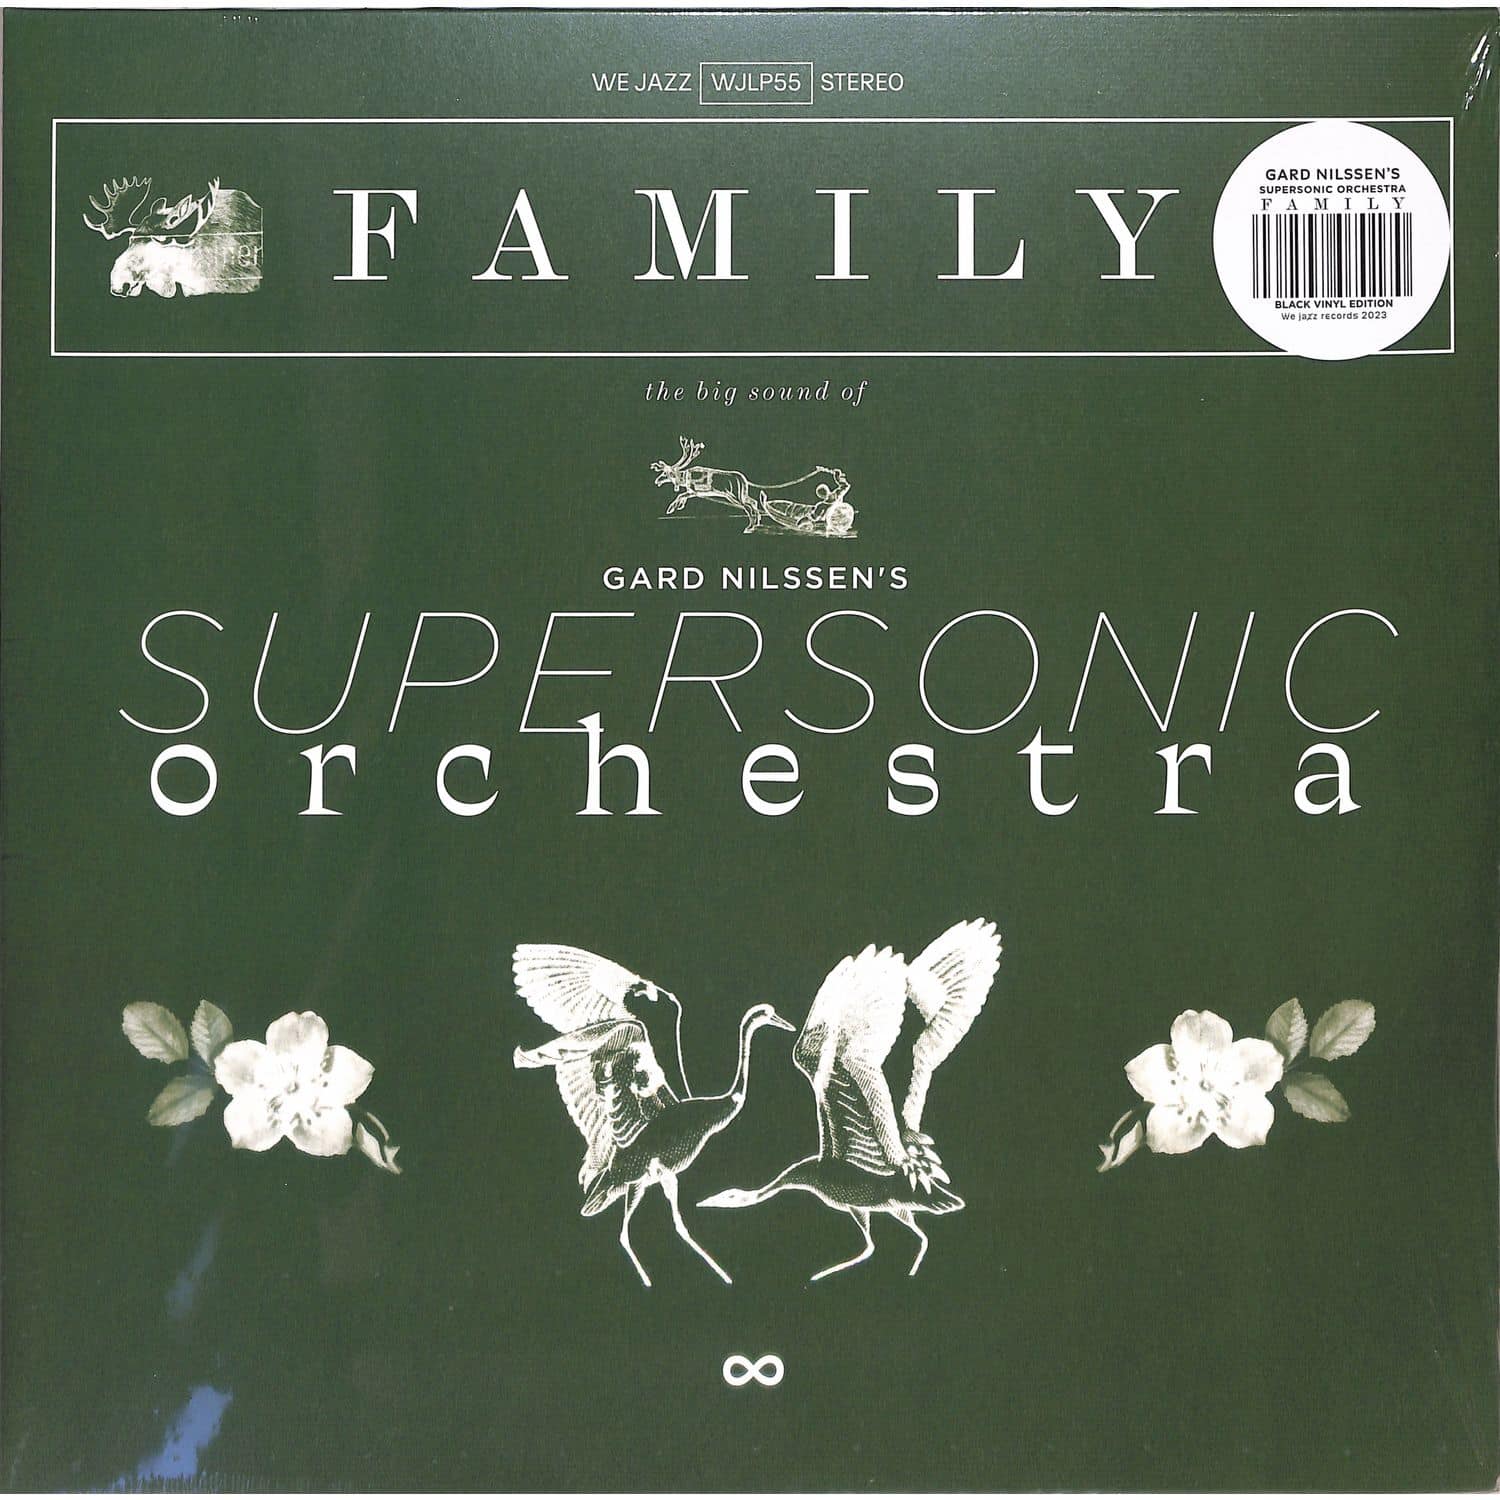 Gard Nilssens Supersonic Orchestra - FAMILY 